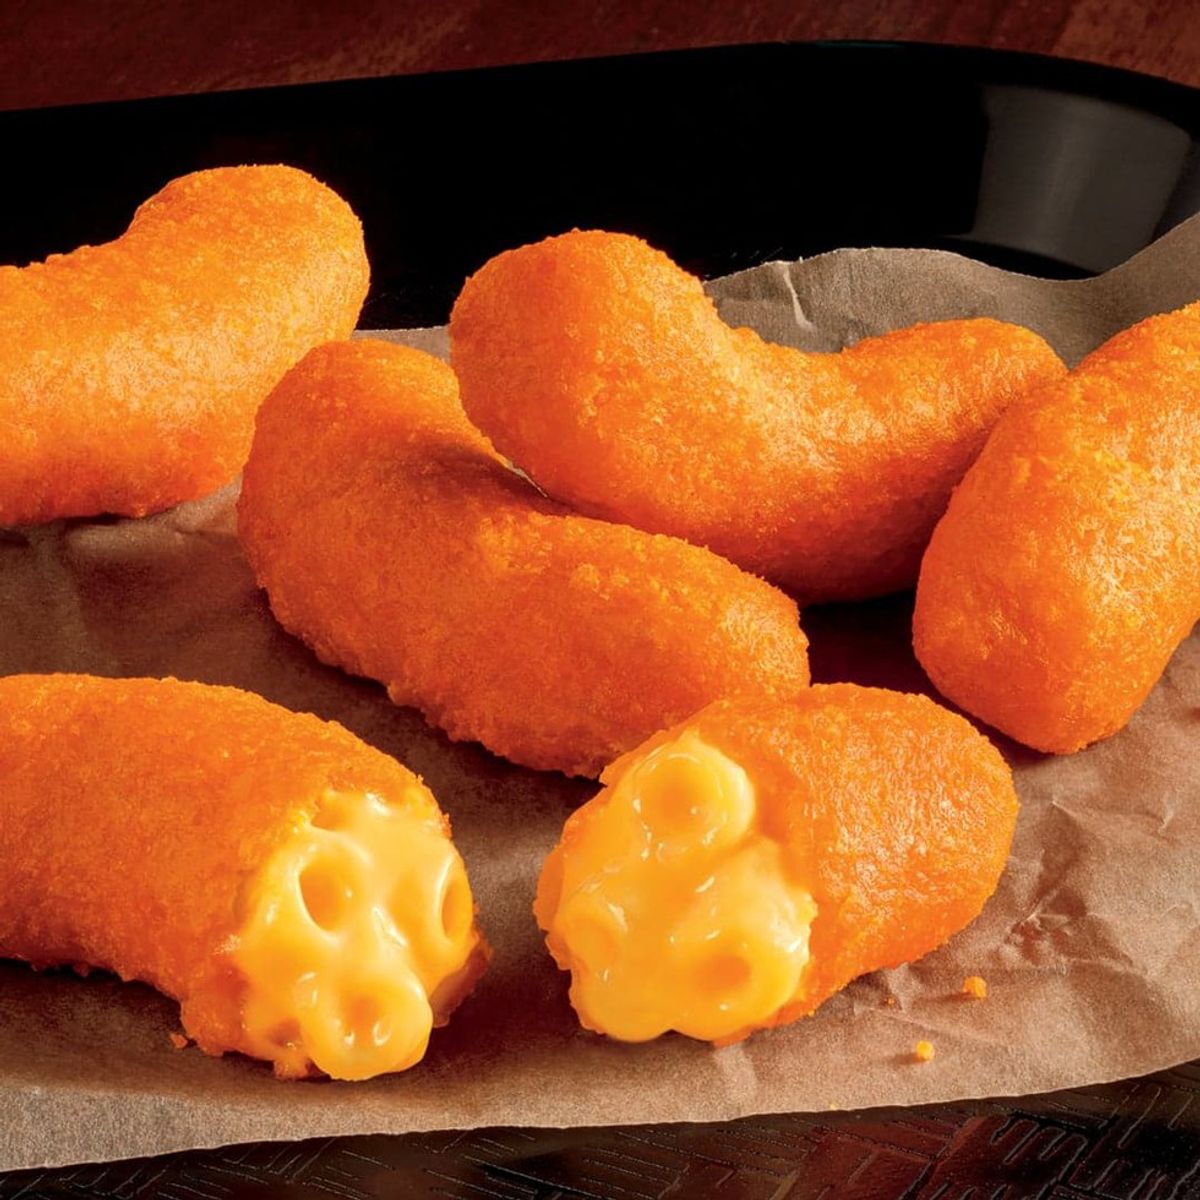 I Tried Burger King's Mac and Cheetos So You Don't Have To